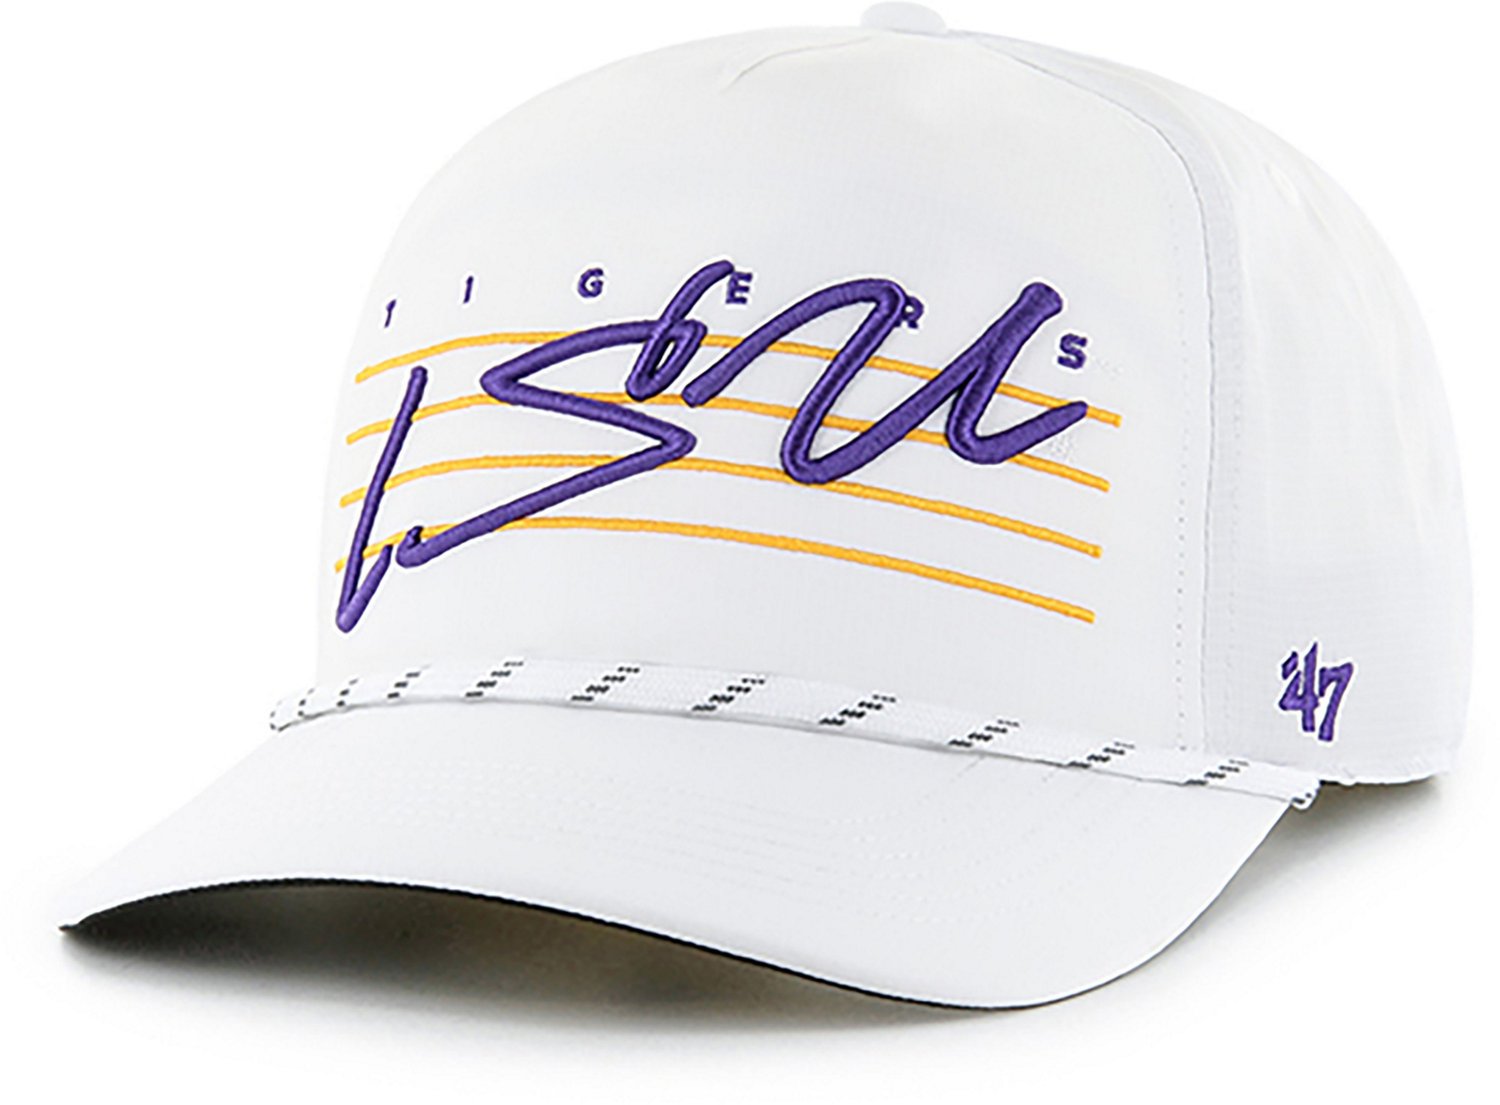  '47 NCAA LSU Tigers Mens Clean Up Adjustable Hat Clean Up  Adjustable Hat, Team Color, One Size : Sports & Outdoors